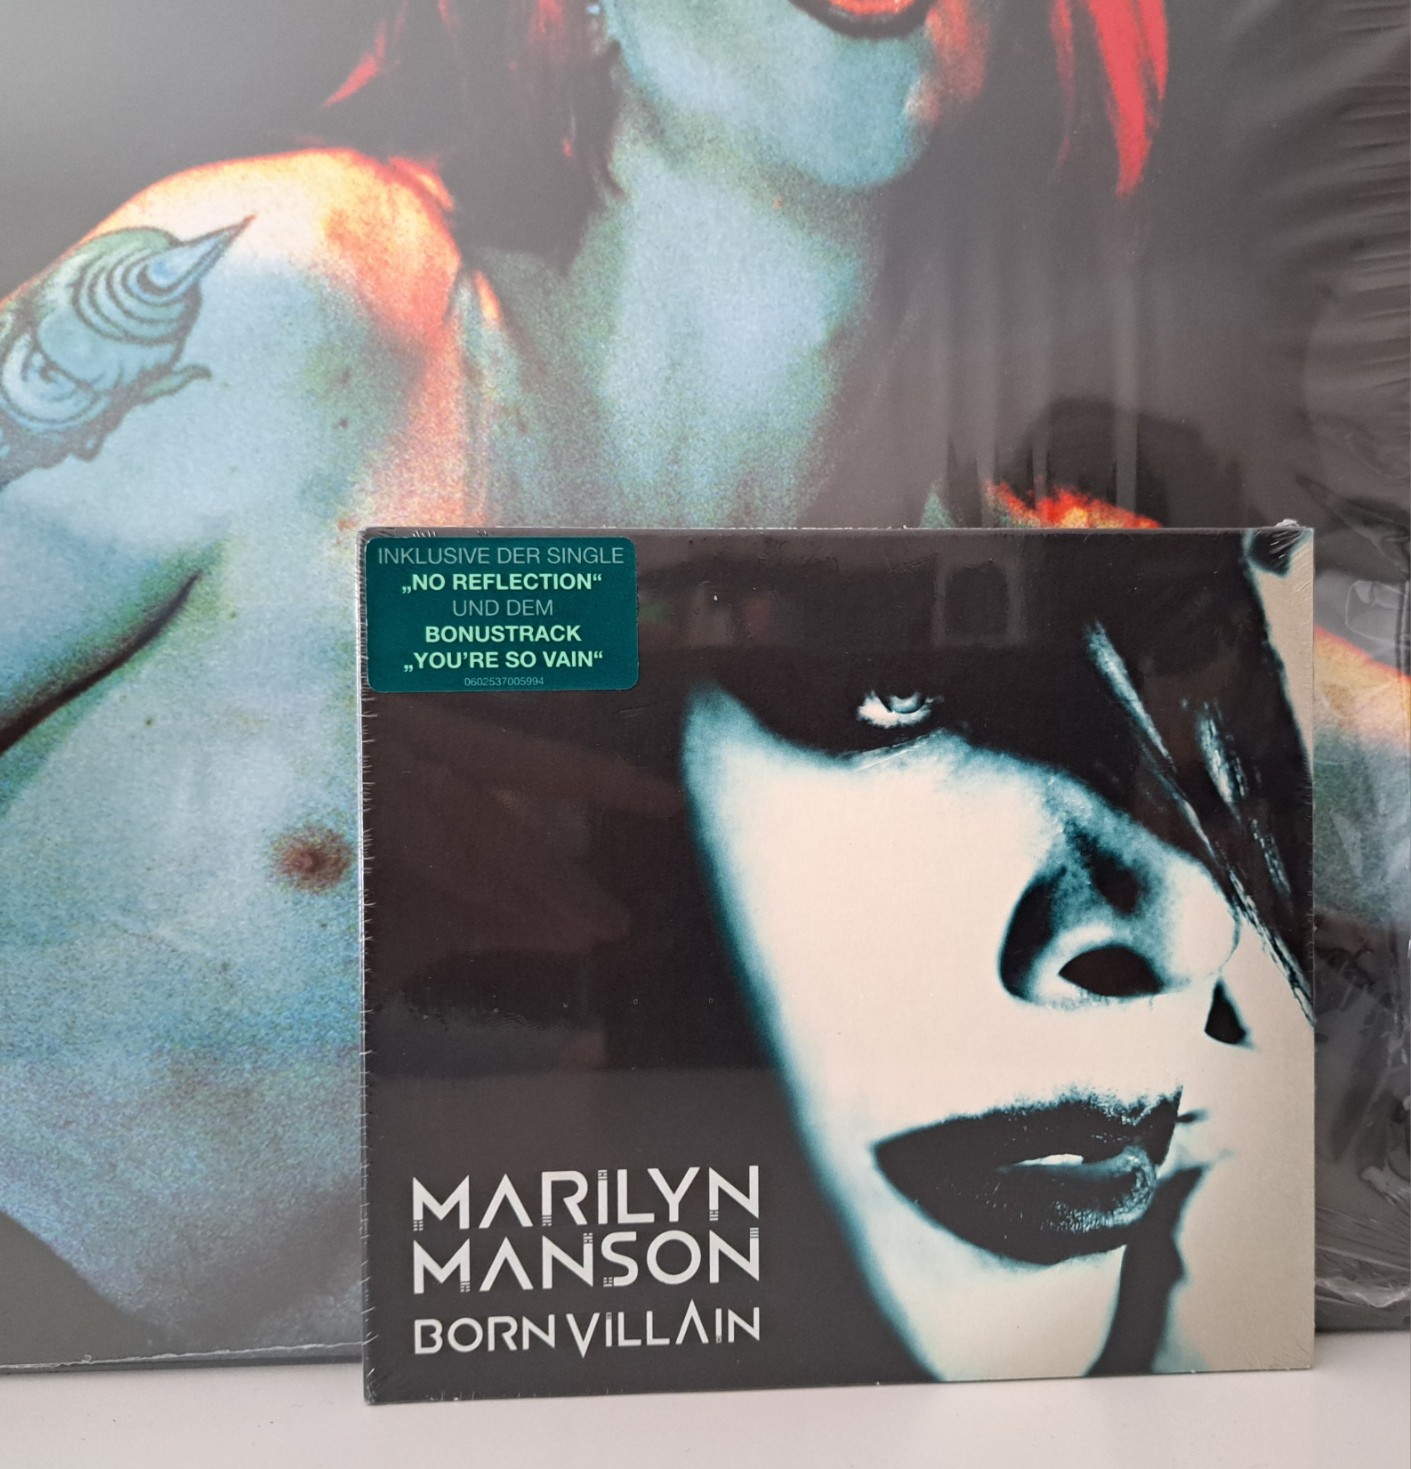 A picture of Marilyn Manson's Born Villain in front of a bigger Manson picture. Both are quite reflective as they're wrapped in plastic, but the CD has a sticker saying:  Inklusive der single "NO REFLECTION" und dem BONUSTRACK "YOU'RE SO VAIN"  While "You're So Vain" is announced as a bonus track, I challenge you to find an edition of this record without it (spoiler alert: as far as I know, there isn't one, and I've looked for it - at lot).